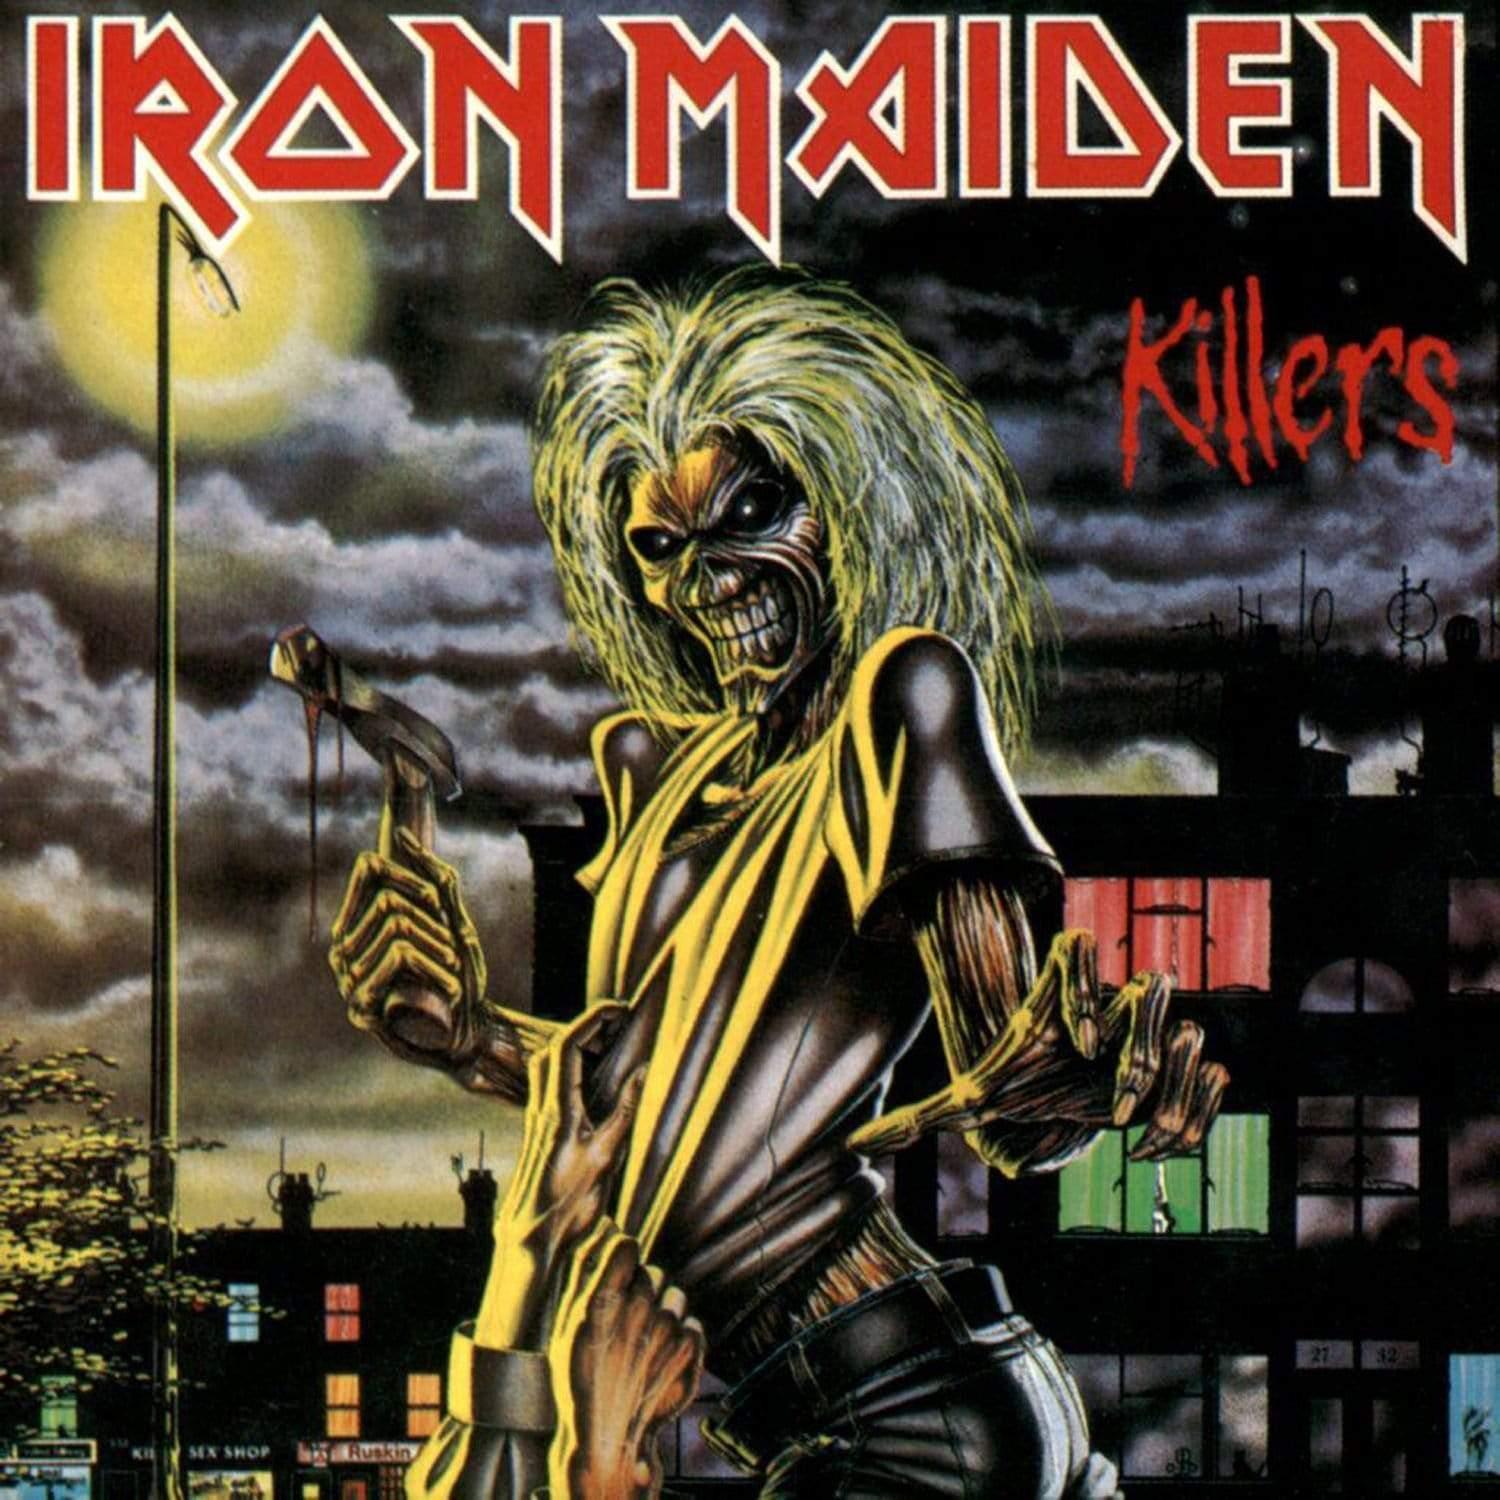 Iron Maiden - Killers (Remastered, 180 Gram) (LP) hq nude image